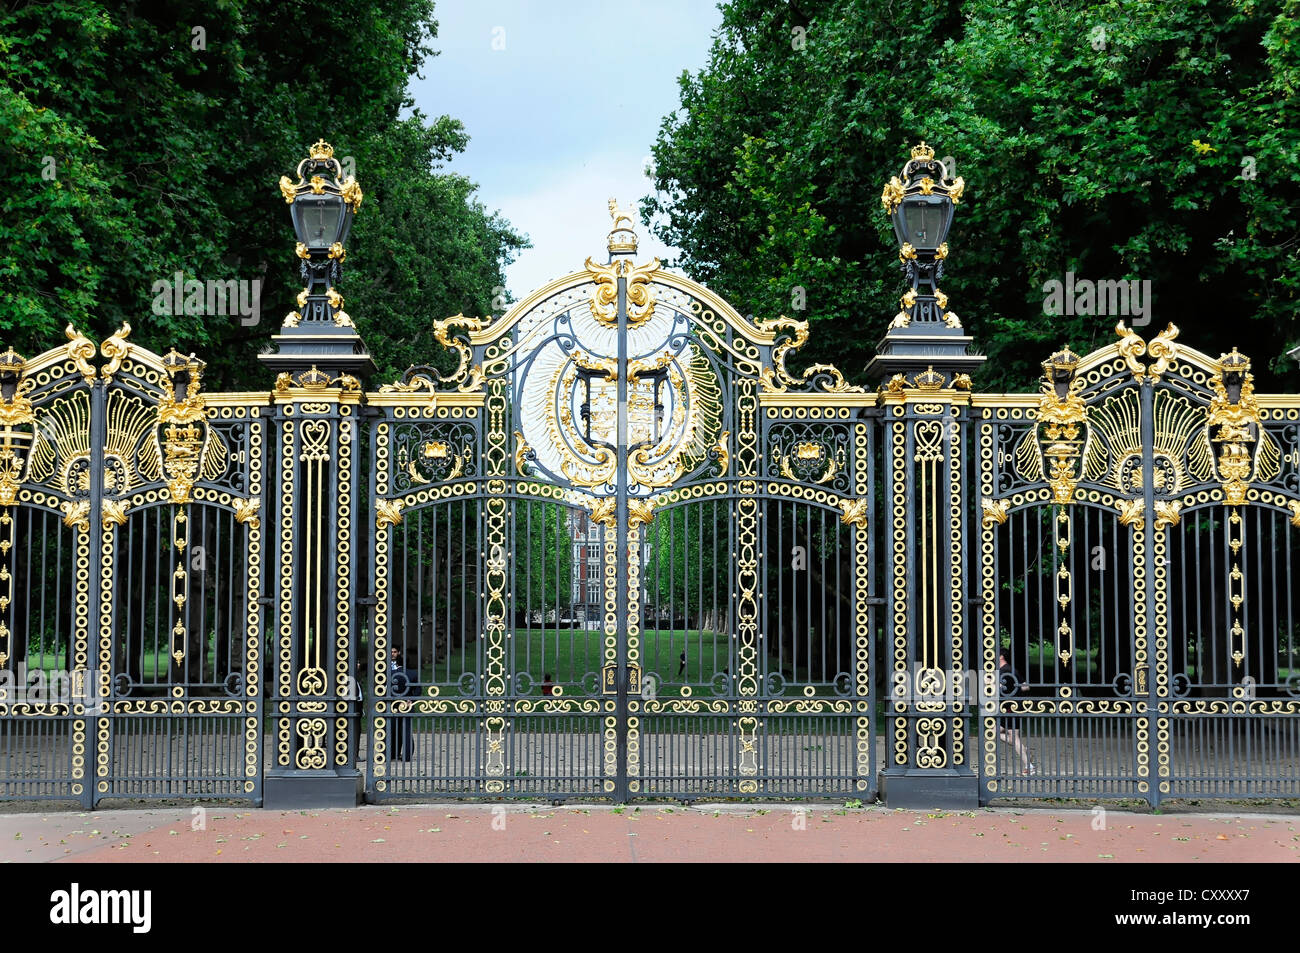 Entrance gate, royal coat of arms on the gate of Buckingham Palace, London, England, Great Britain, Europe Stock Photo